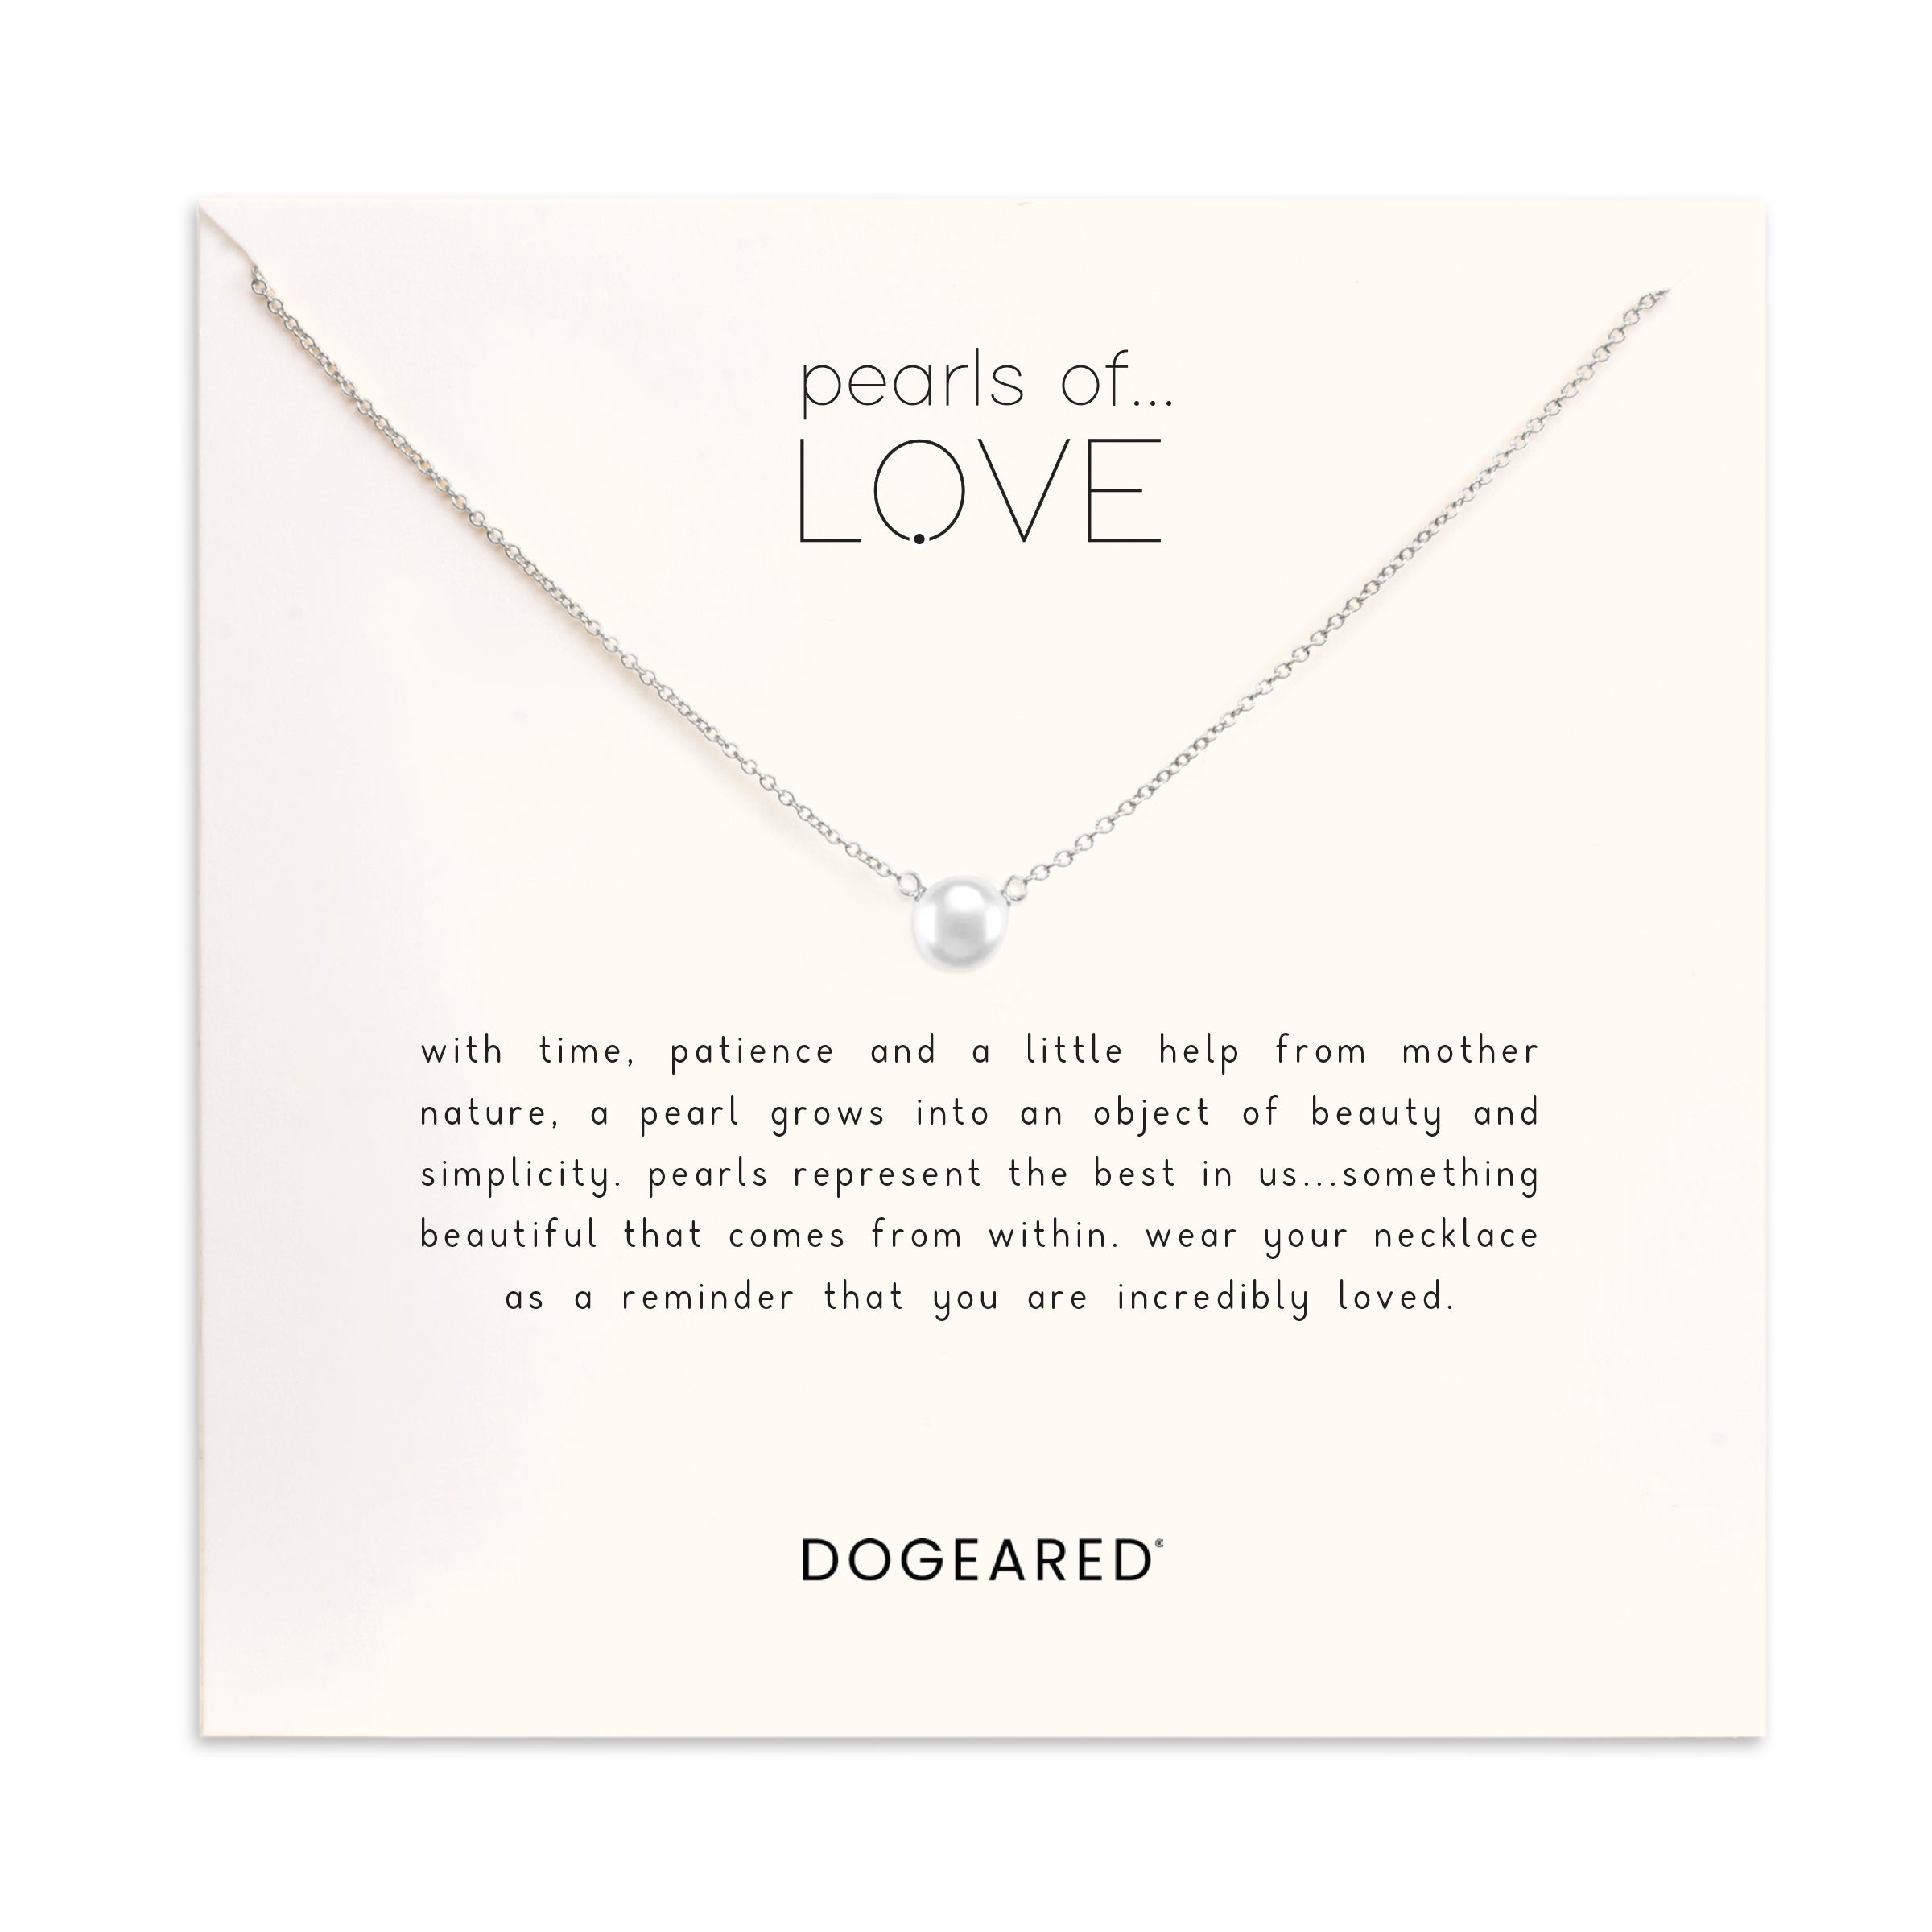 Pearls of love small white pearl necklace - Dogeared